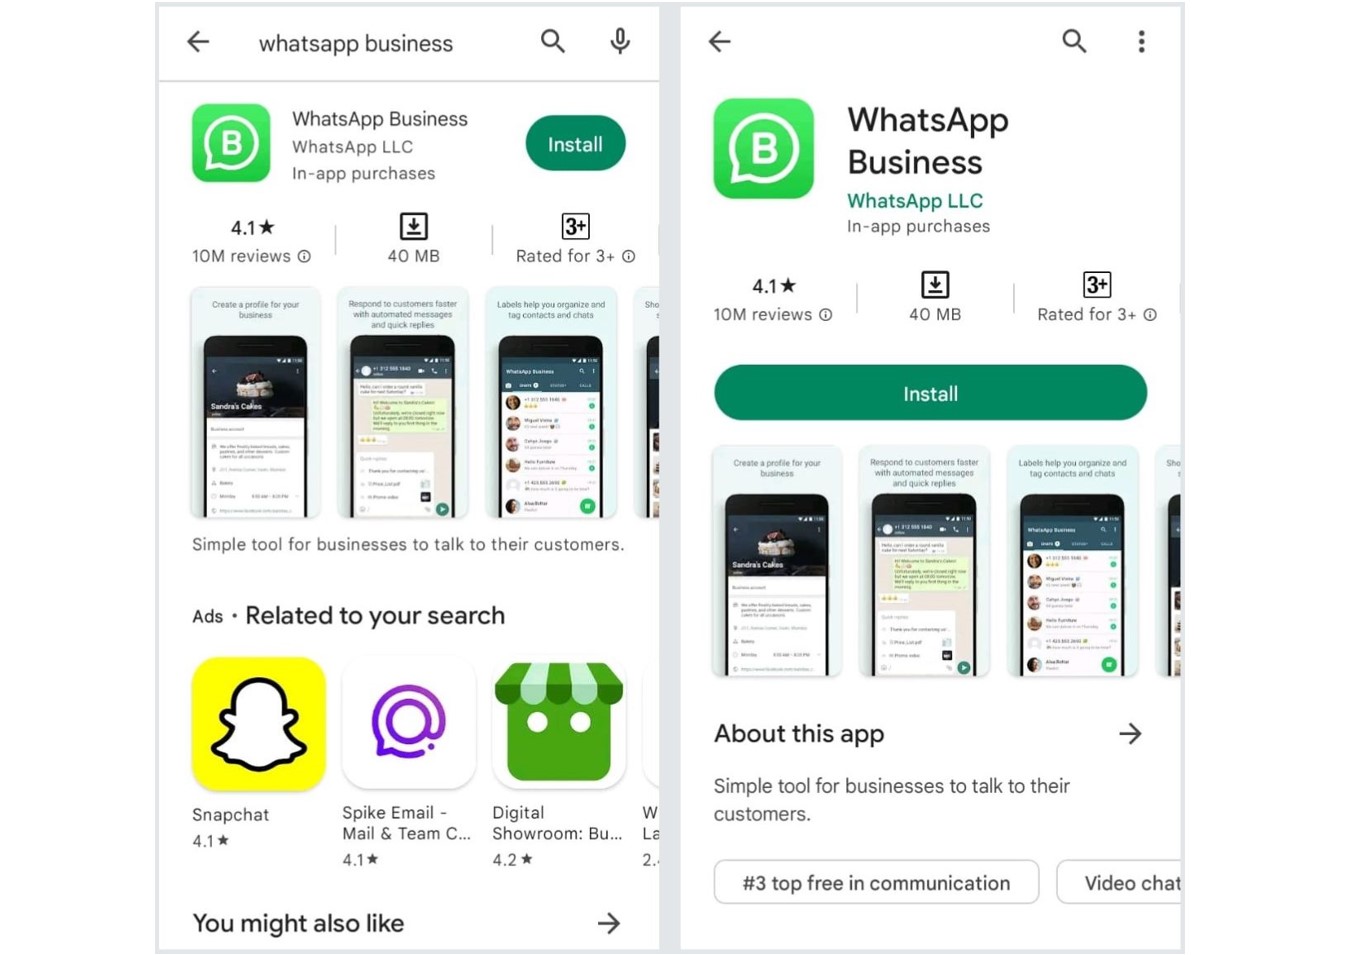 Installation of WhatsApp Business App in Google Play Store